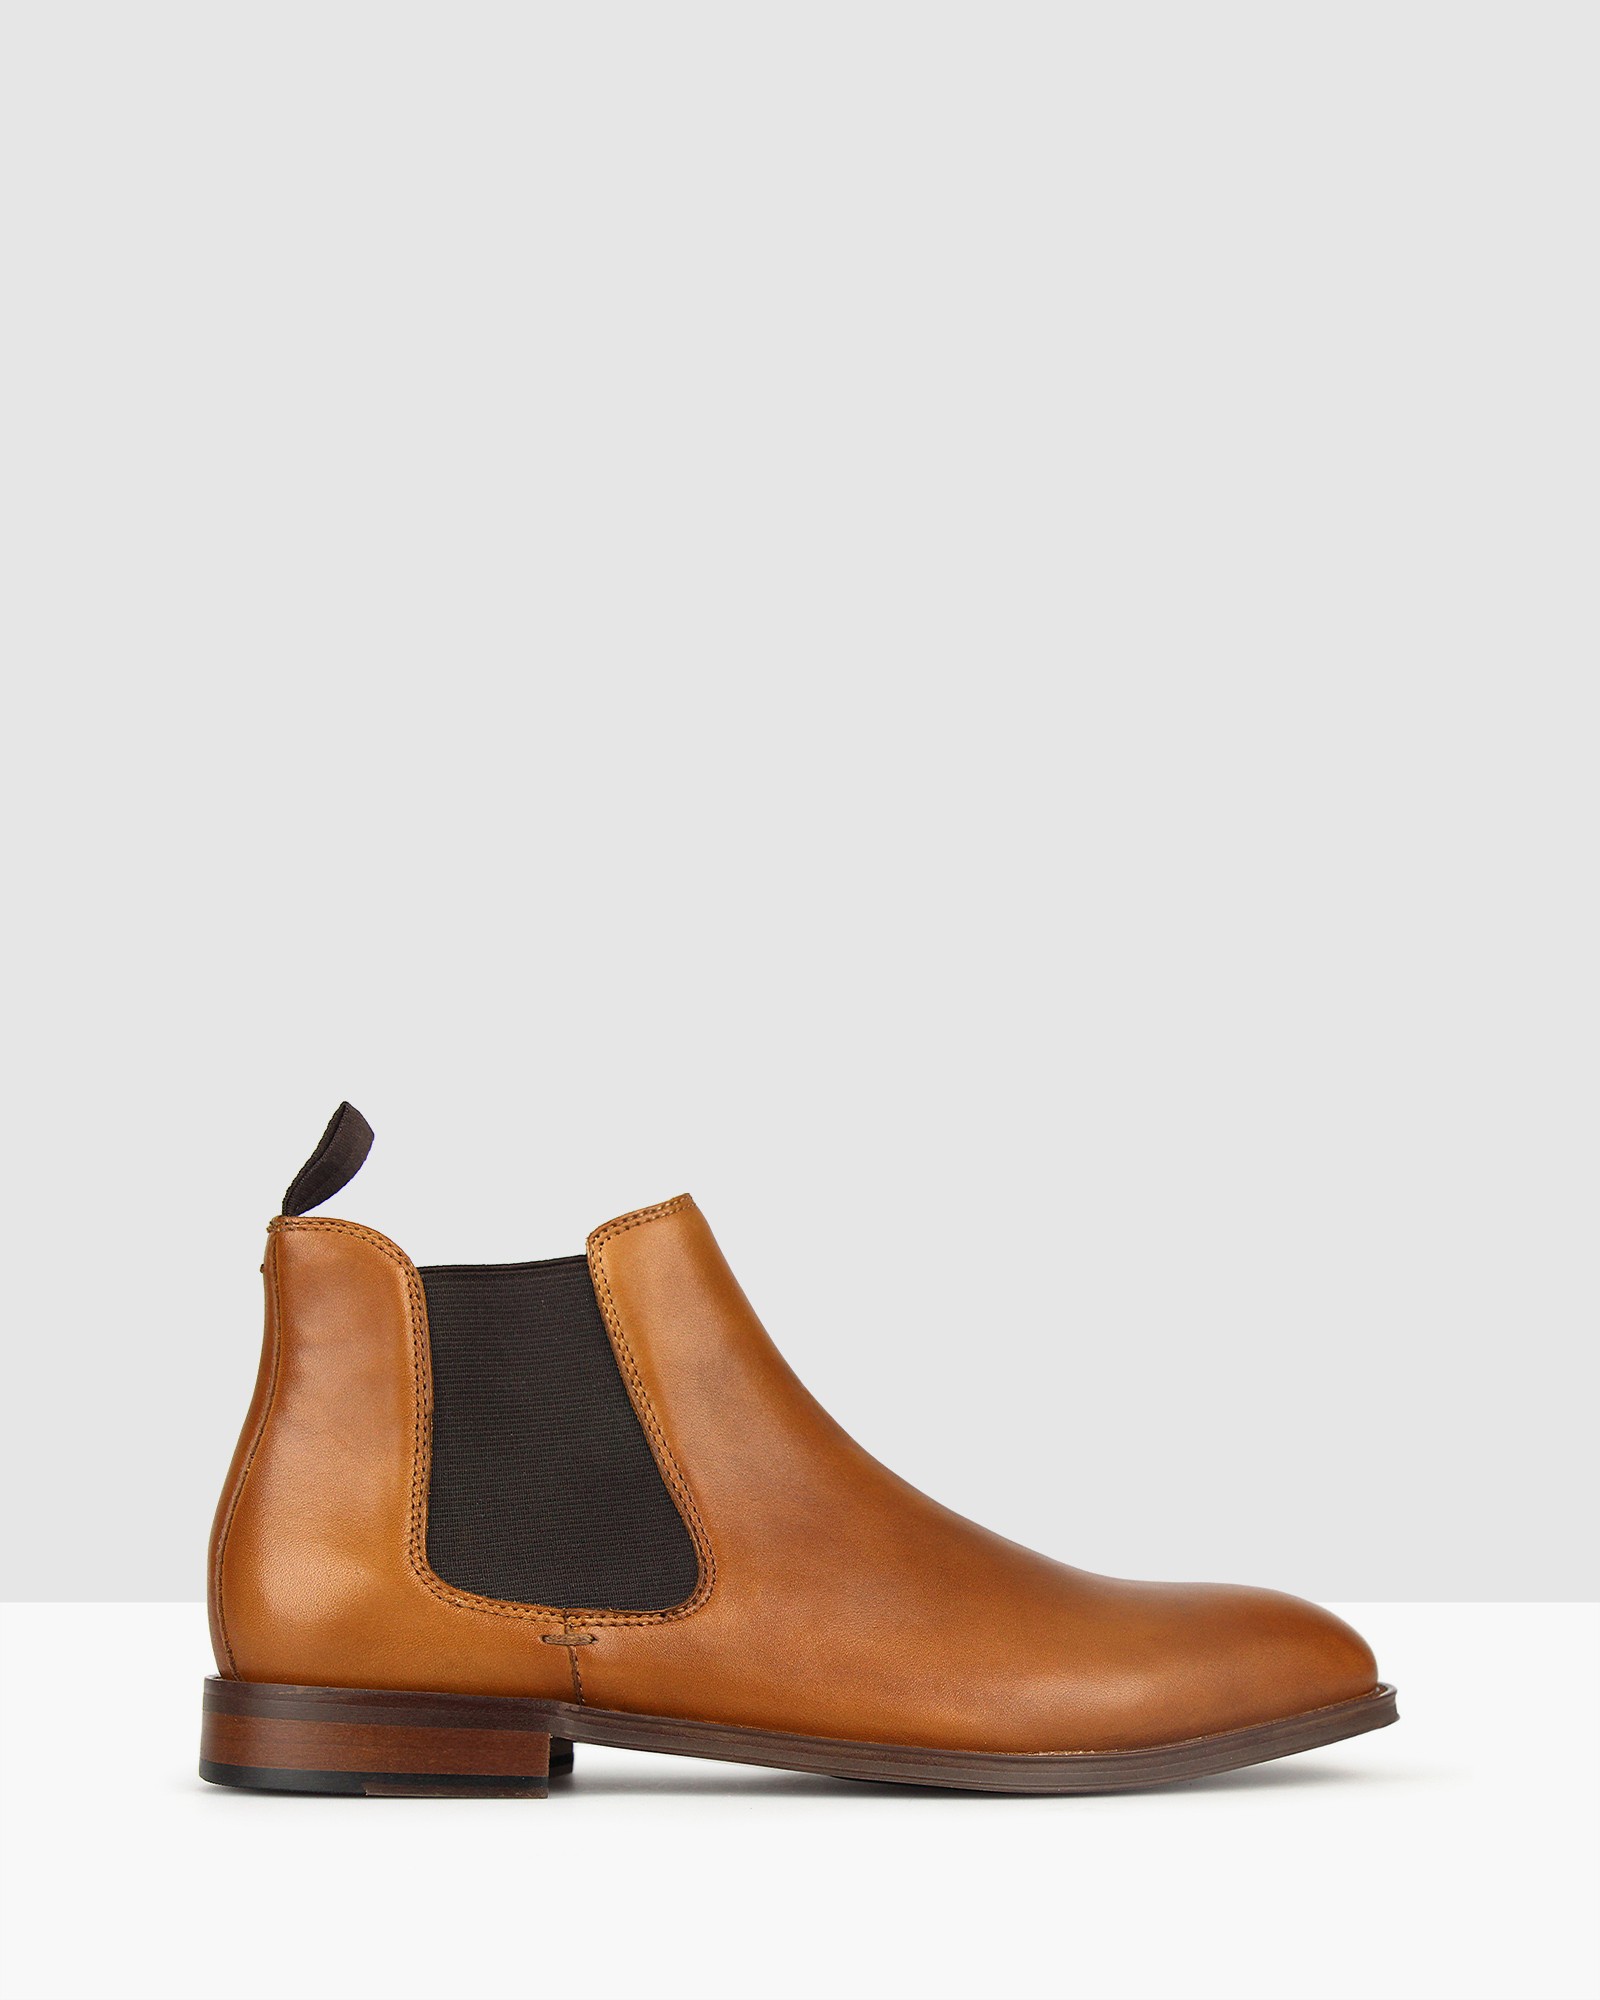 Wildfire Leather Chelsea Boots Whiskey by Betts | ShoeSales